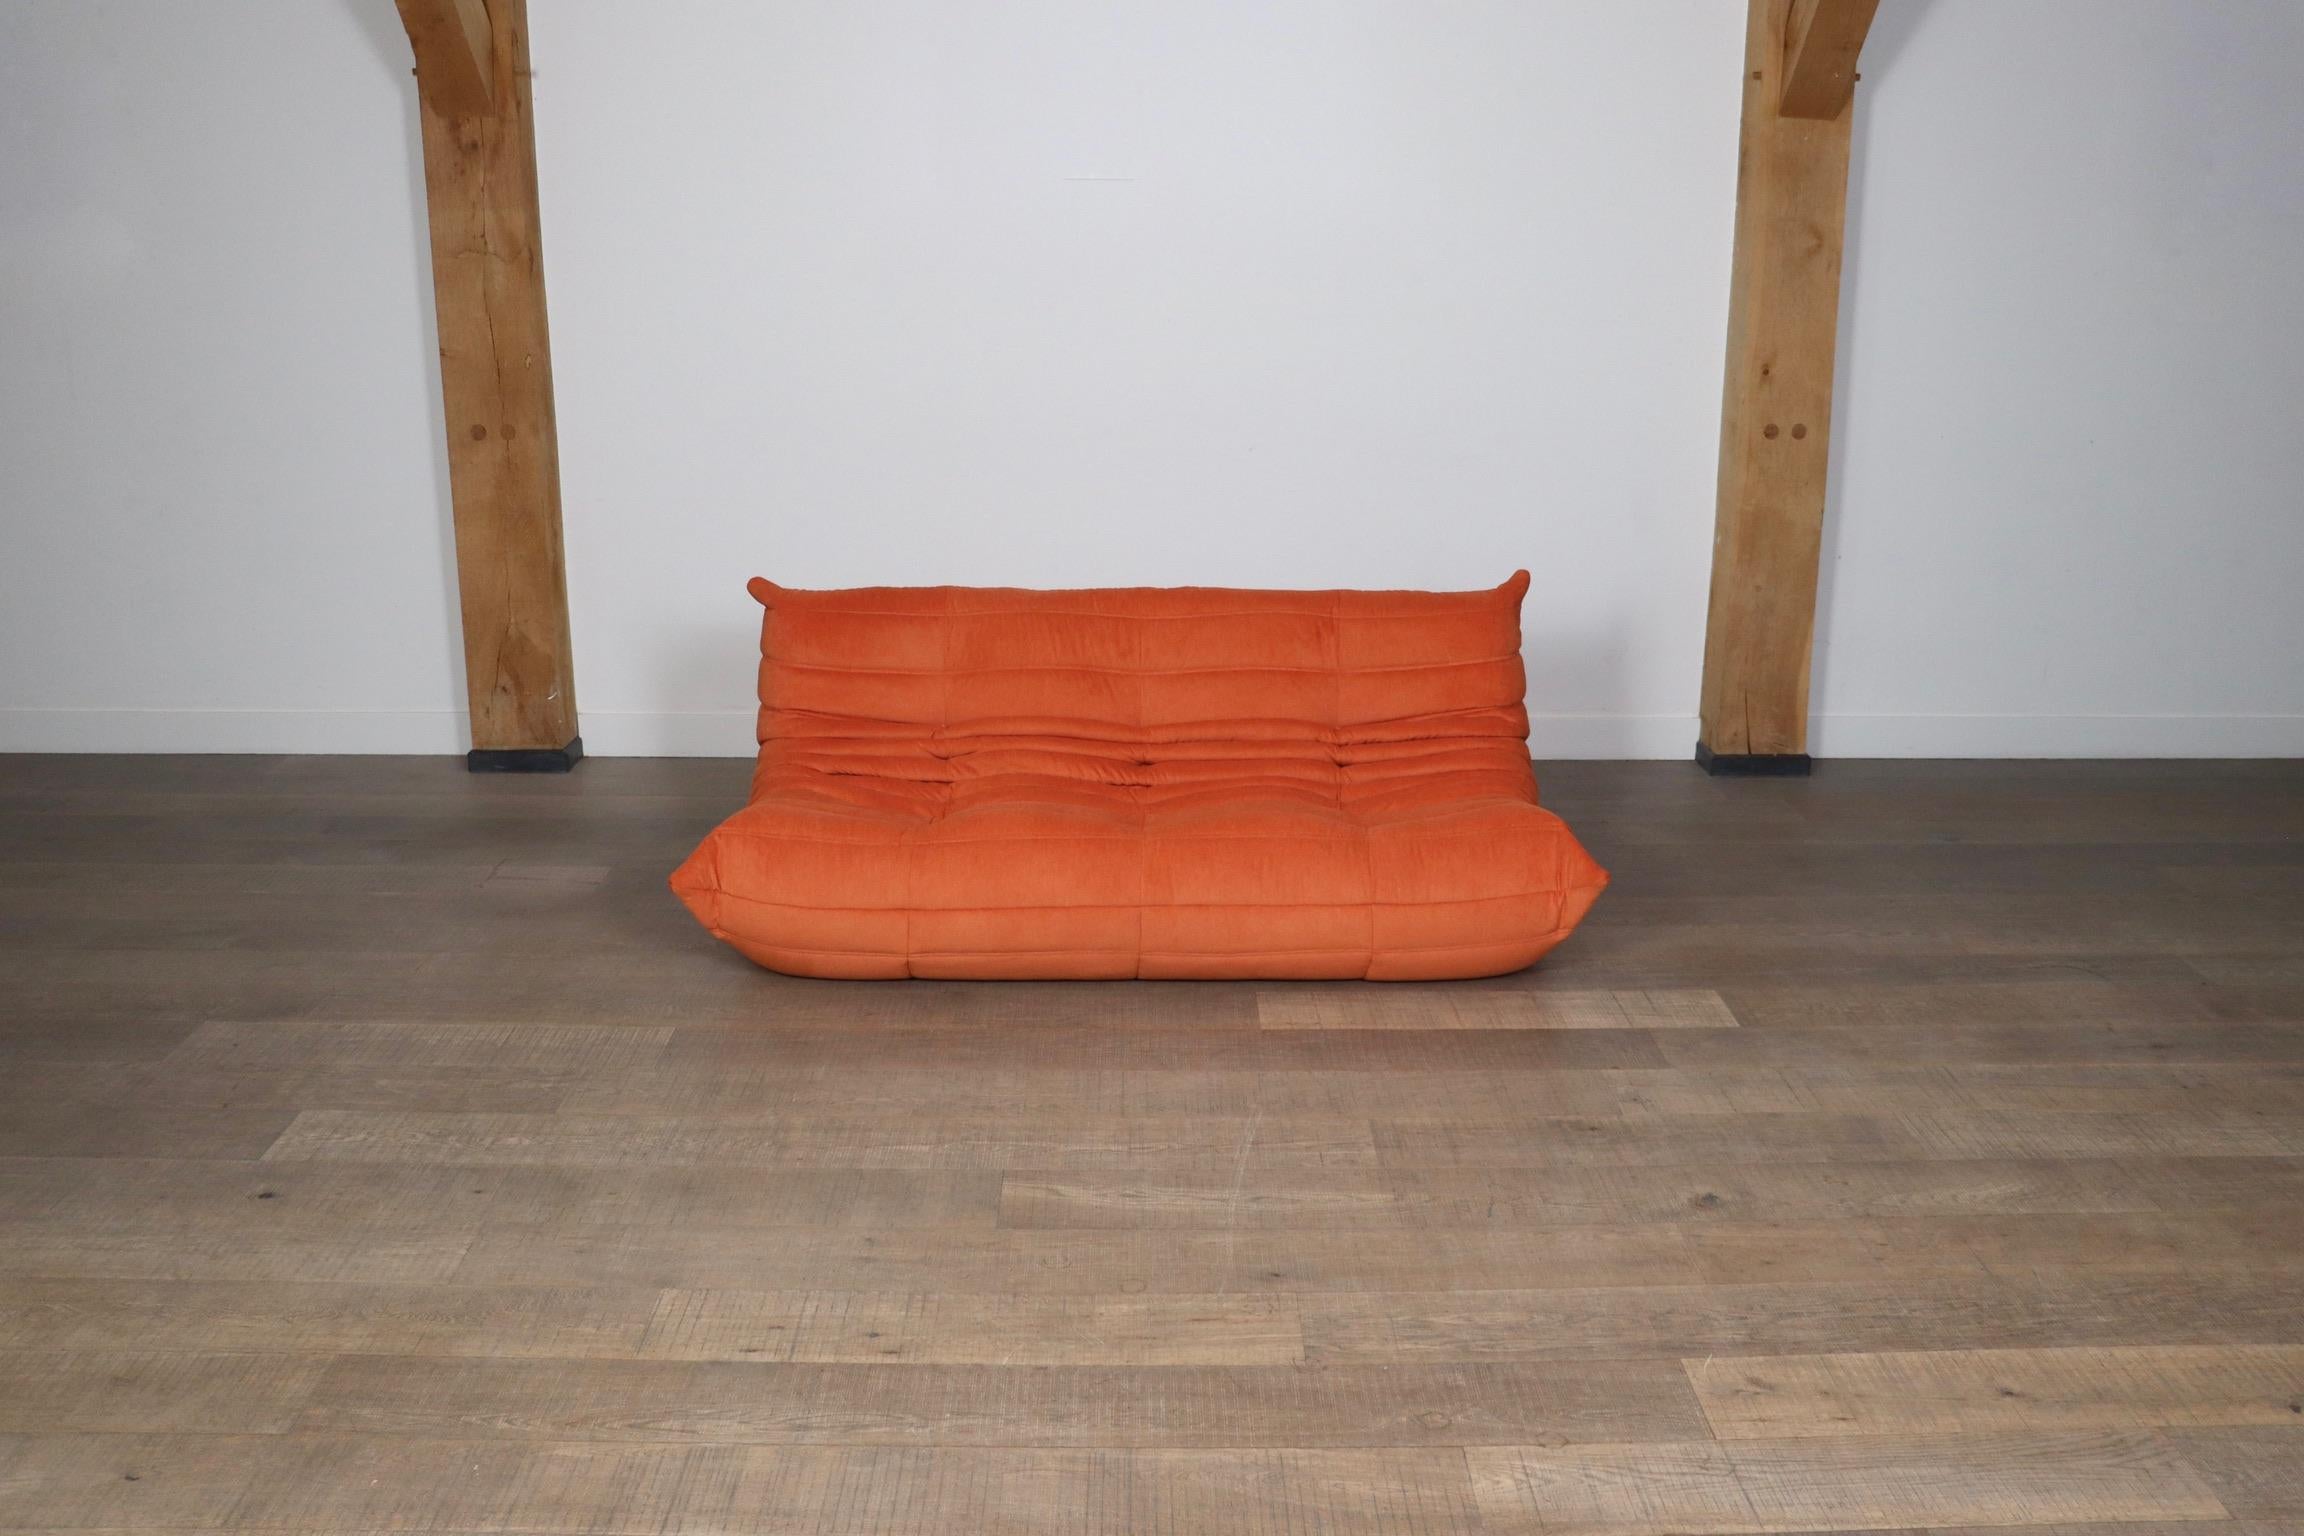 Beautiful Ligne Roset Togo three seater sofa in original coral upholstery by Michel Ducaroy, 1970s. This iconic design has become more and more popular over the years. The lightweight design combined with fun colors and materials make these seating